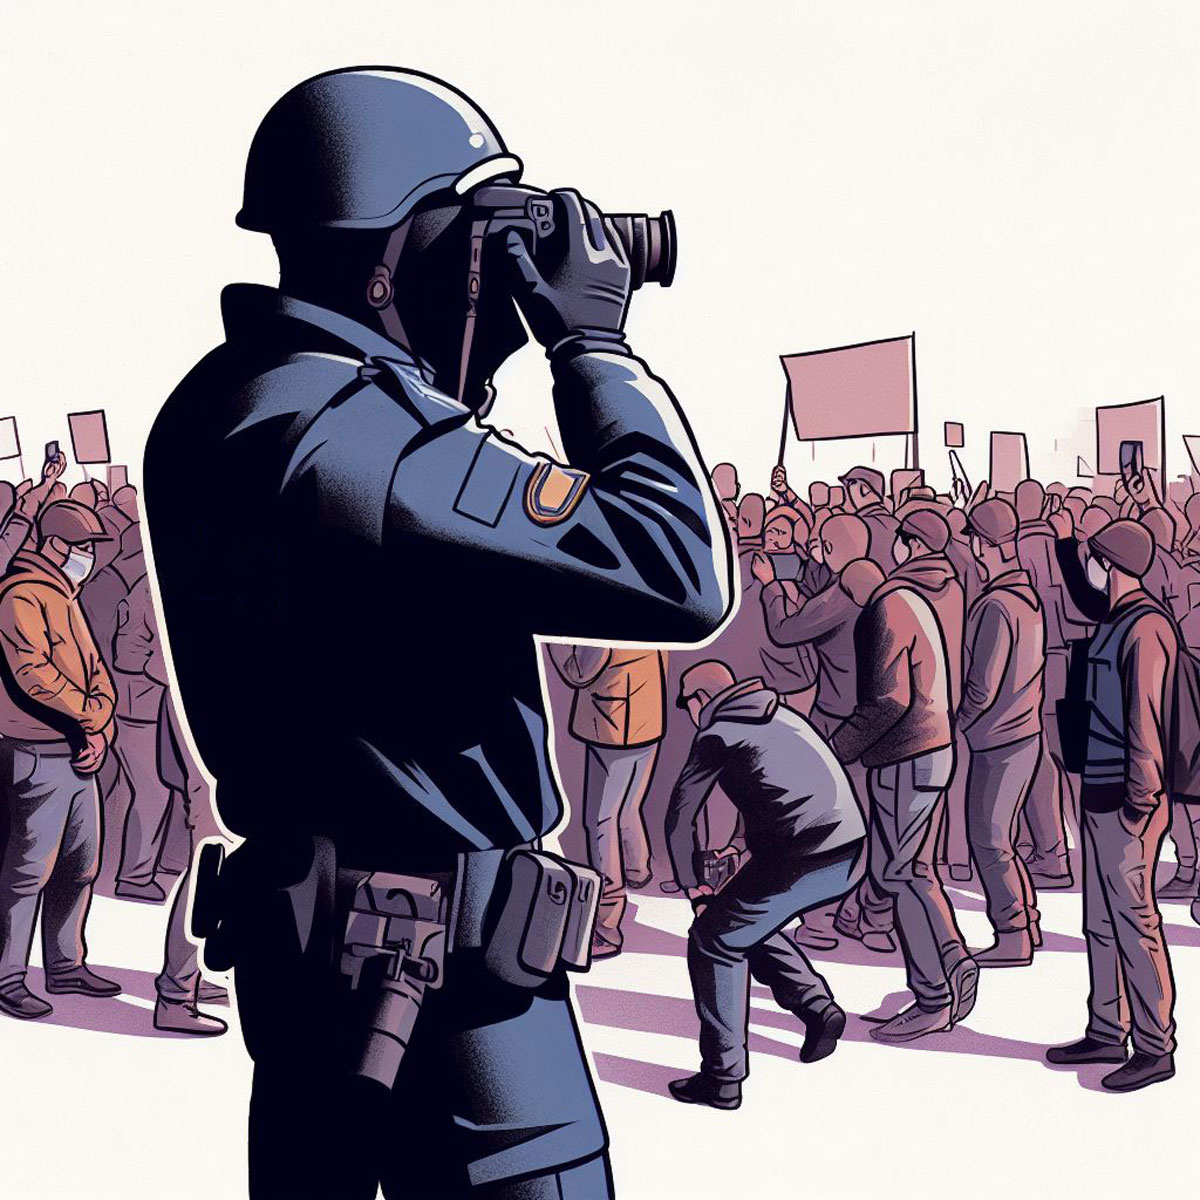 italian police takes photos of people attending a protest in Italy - Illustration